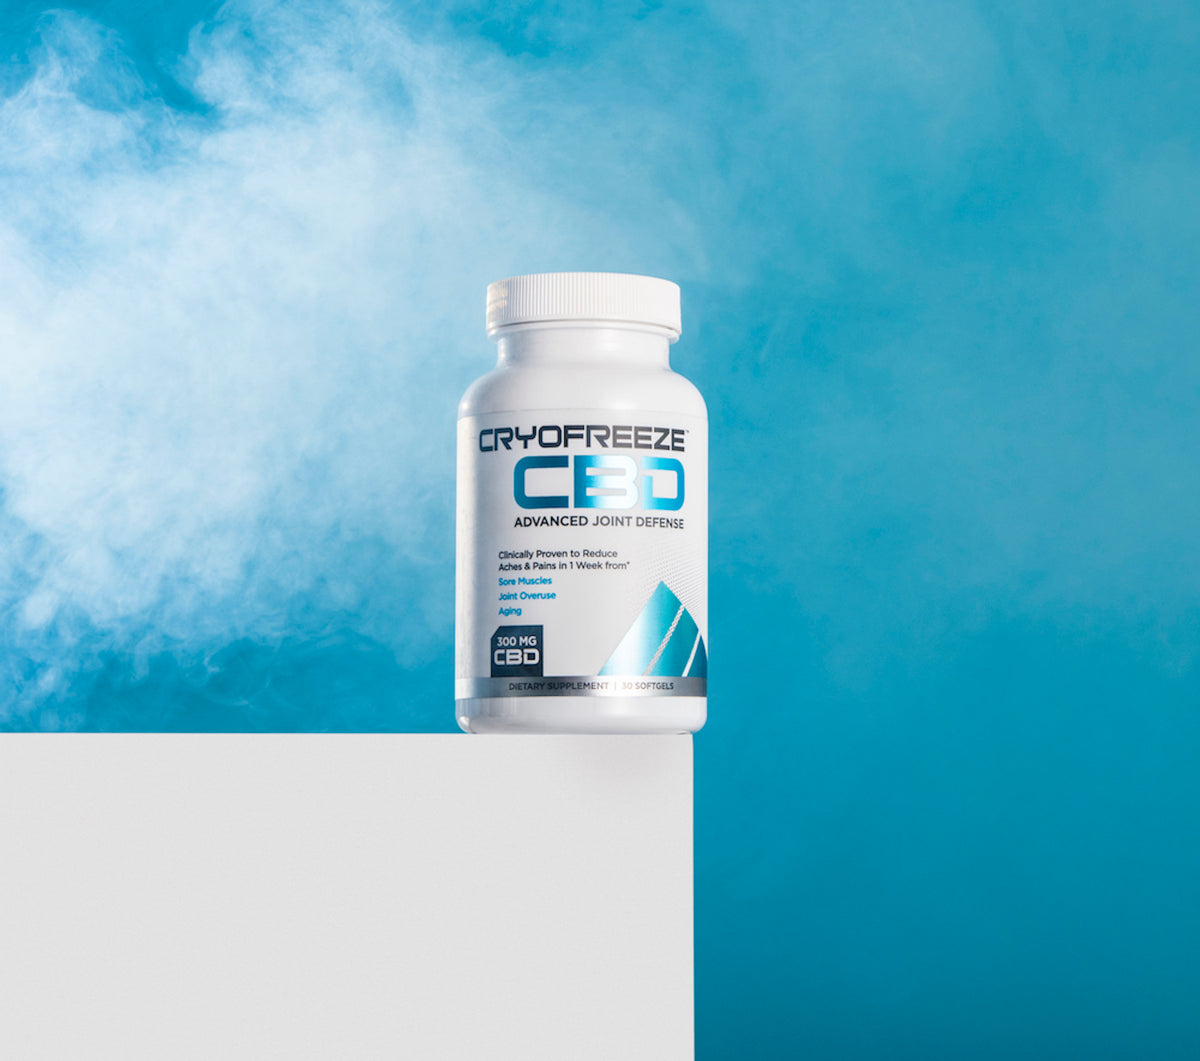 CryoFreeze CBD Advanced Joint Defense | Subscribe & Save - Omax Health